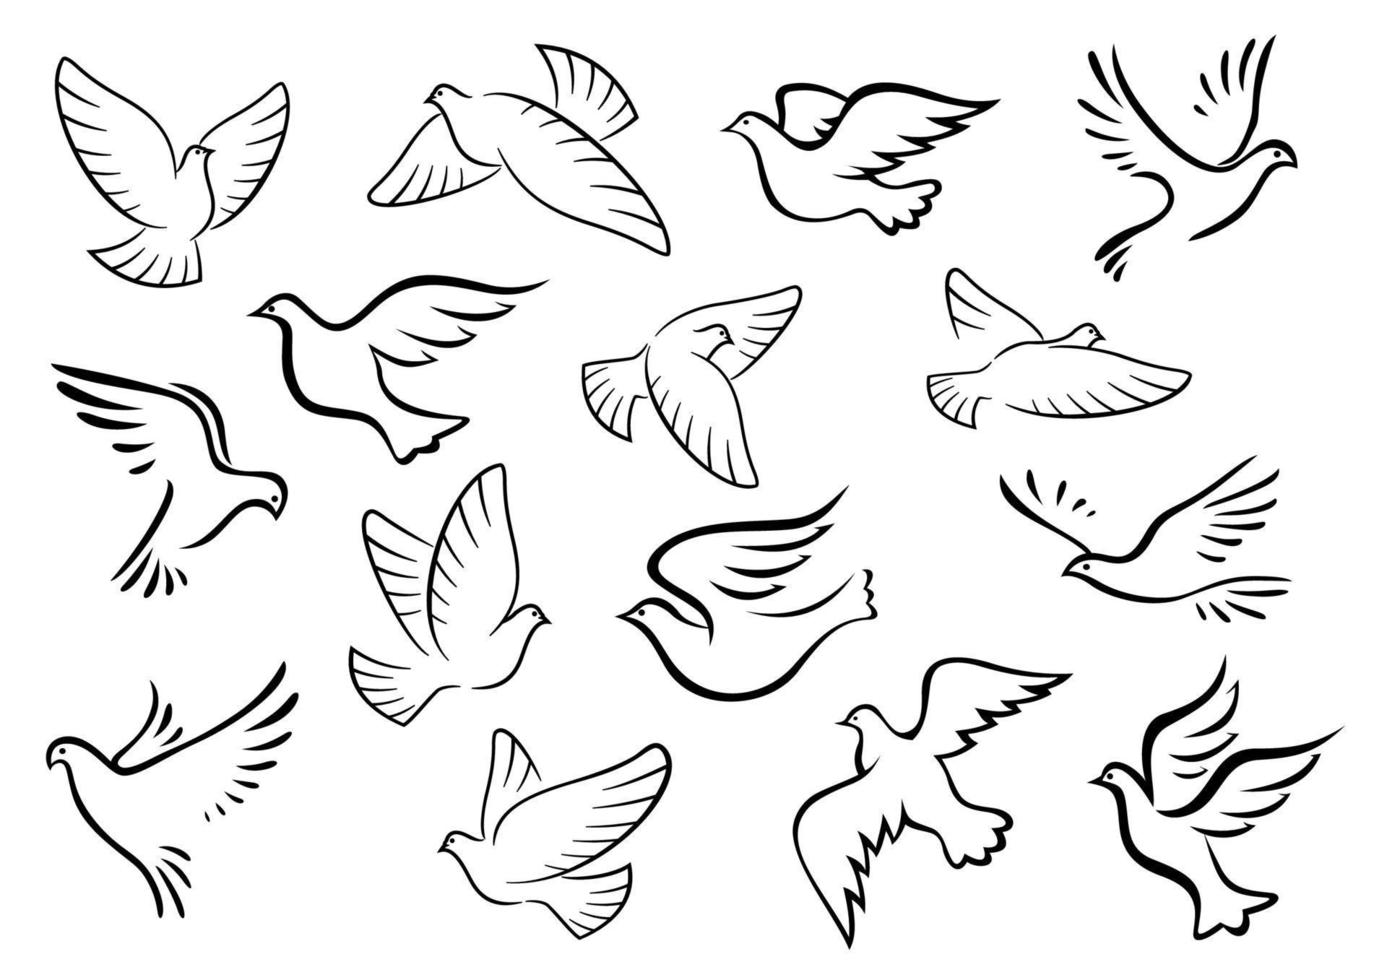 Pigeon and dove birds silhouettes vector